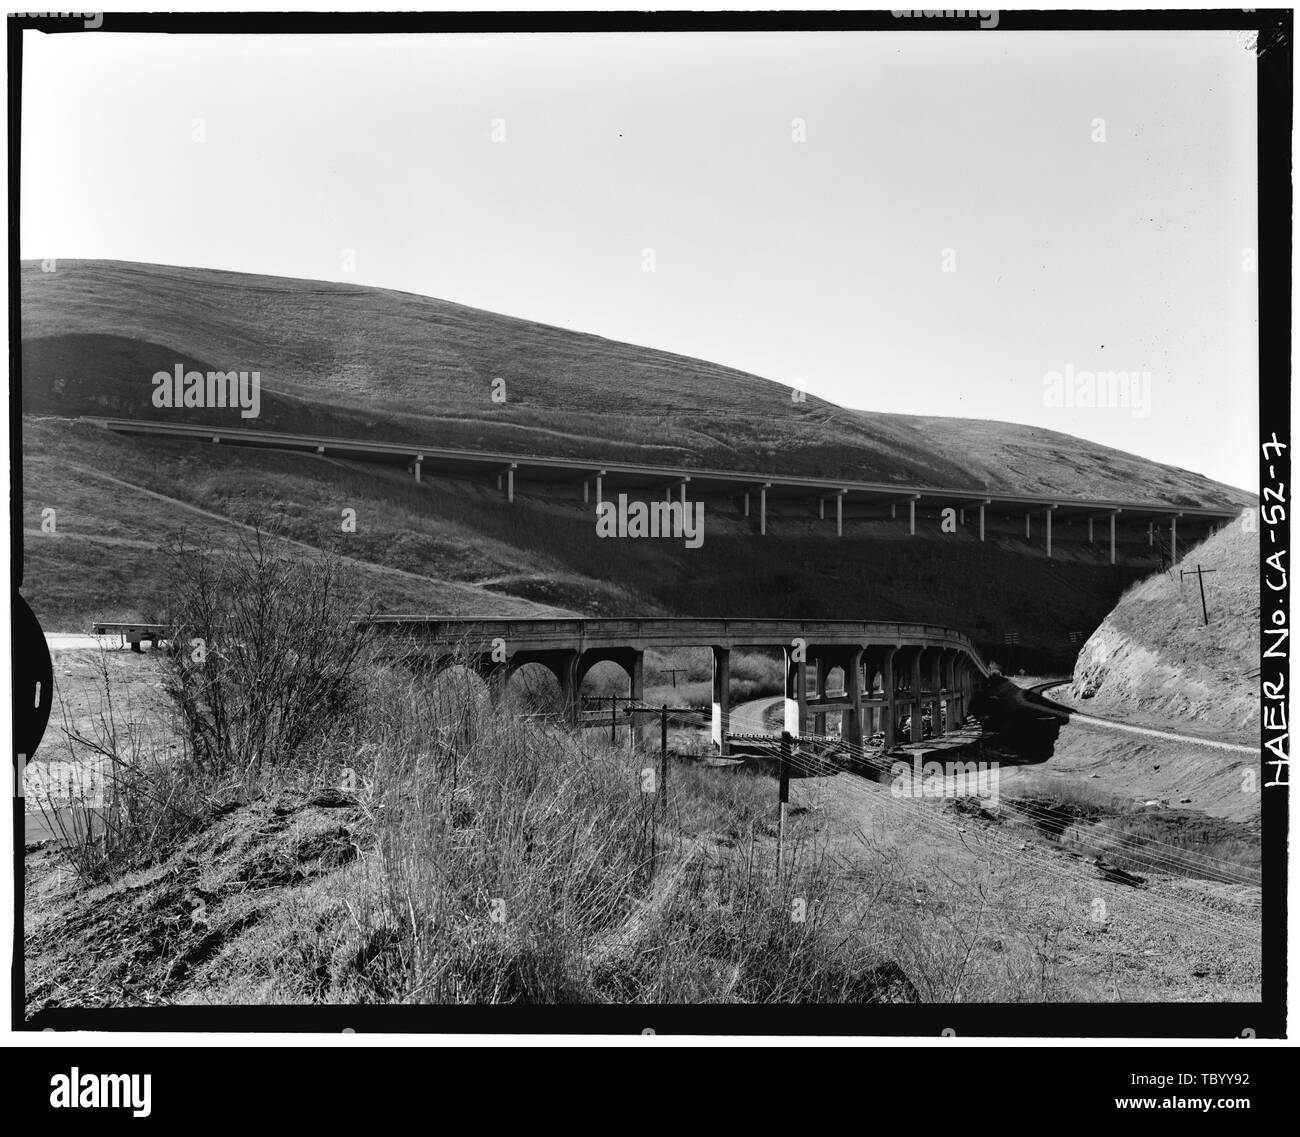 North elevation from shoulder of Altamont Pass Road Interstate Highway 5 viaduct in background former Western Pacific (now Union Pacific) Railroad at right abandoned Southern Pacific right of way beneath bridge view to southwest 90 mm lens  Carroll Overhead Bridge, Altamont Pass Road, Livermore, Alameda County, CA Stock Photo